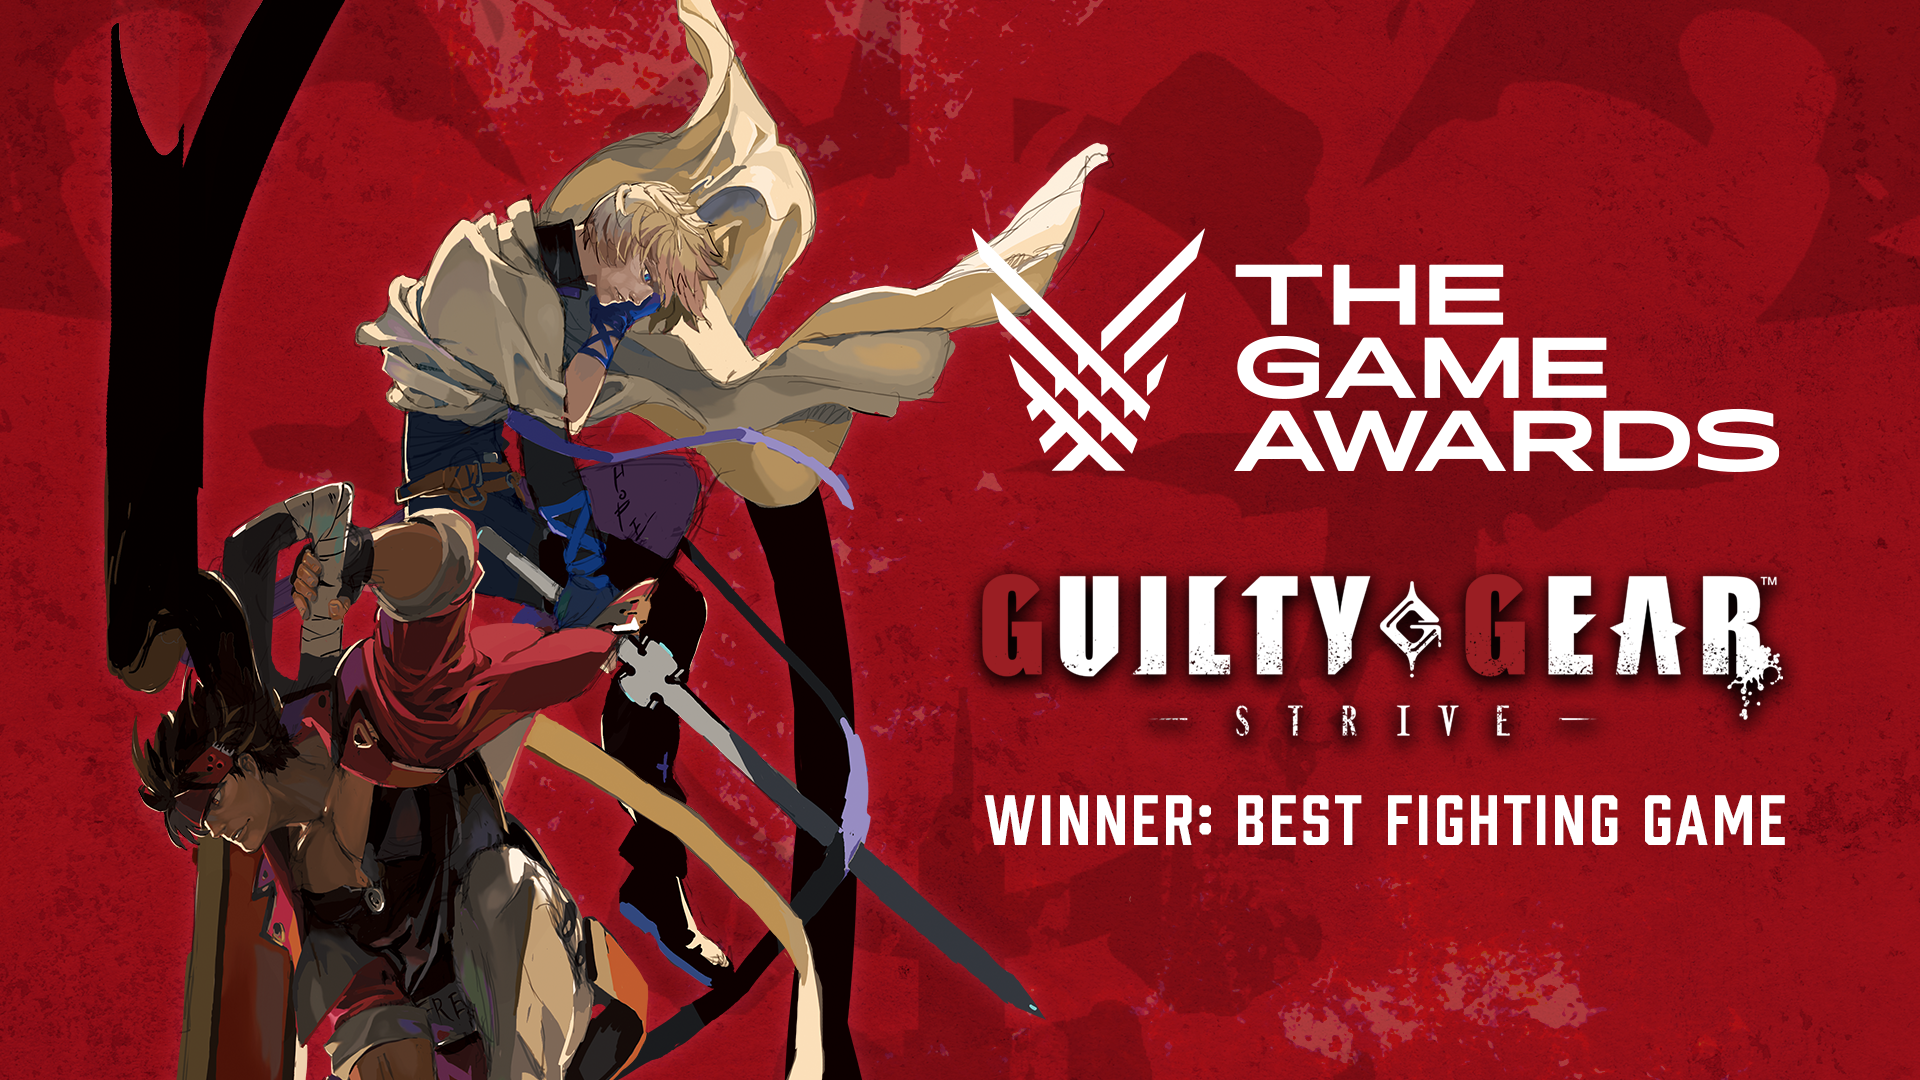 Guilty Gear -Strive- Wins Best Fighting Game at The Game Awards!